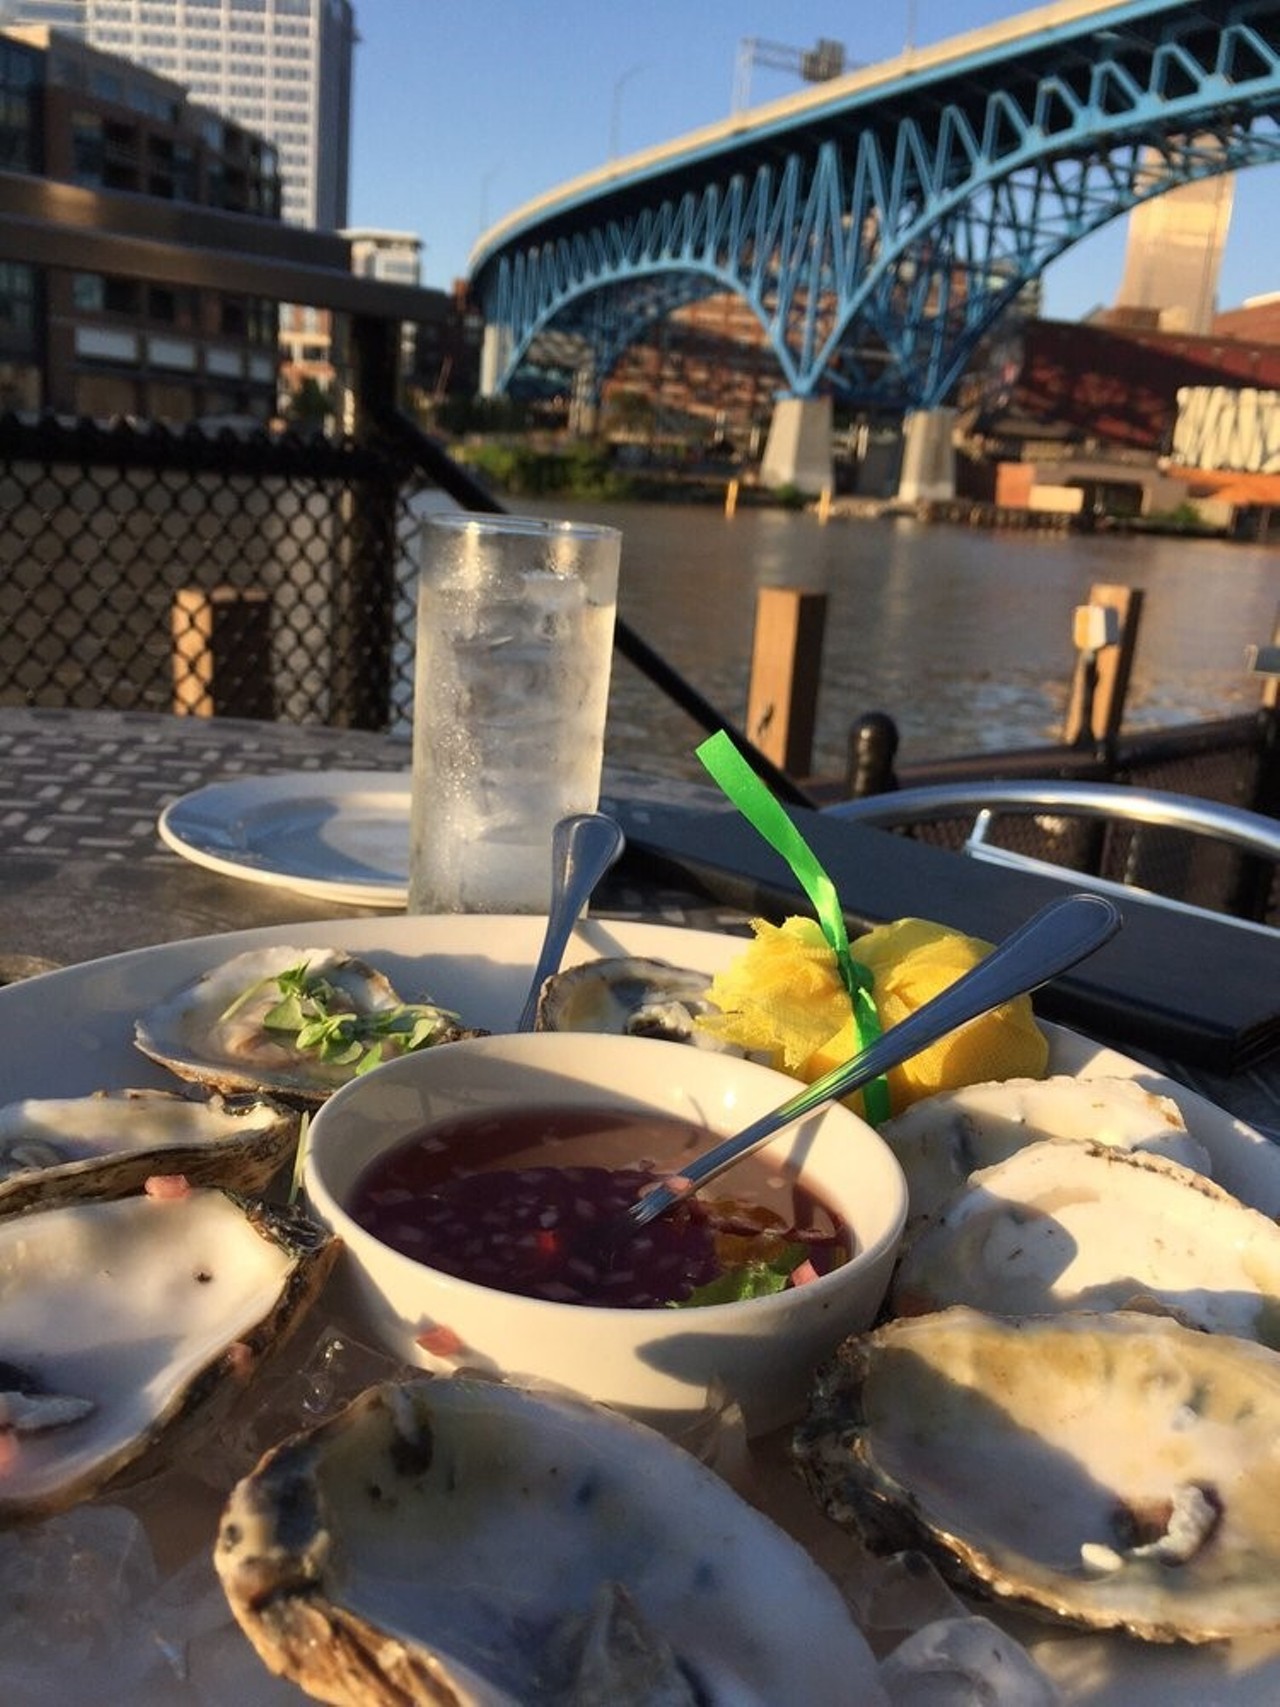 Rusty Anchor at the Music Box - 
1148 Main Ave. Cleveland - 
HH: 4-6:30 PM M-F
The title holder for both Most Mouthwatering Menu at the Downtown Cleveland Restaurant Week 2016 and OpenTable&#146;s Diners&#146; Choice 2016. Sitting perfectly amidst the water and the city&#146;s skyline, you feel like you&#146;re in the heart of Cleveland. If the food and the view&#146;s aren&#146;t enough, they have outdoor music events to soundtrack your experience. Although it is open only as a bar Monday and Tuesday, there&#146;s full restaurant service Wednesday through Sunday. If you haven&#146;t been yet this season, what&#146;re you waiting for?
http://rustyanchorcle.com/